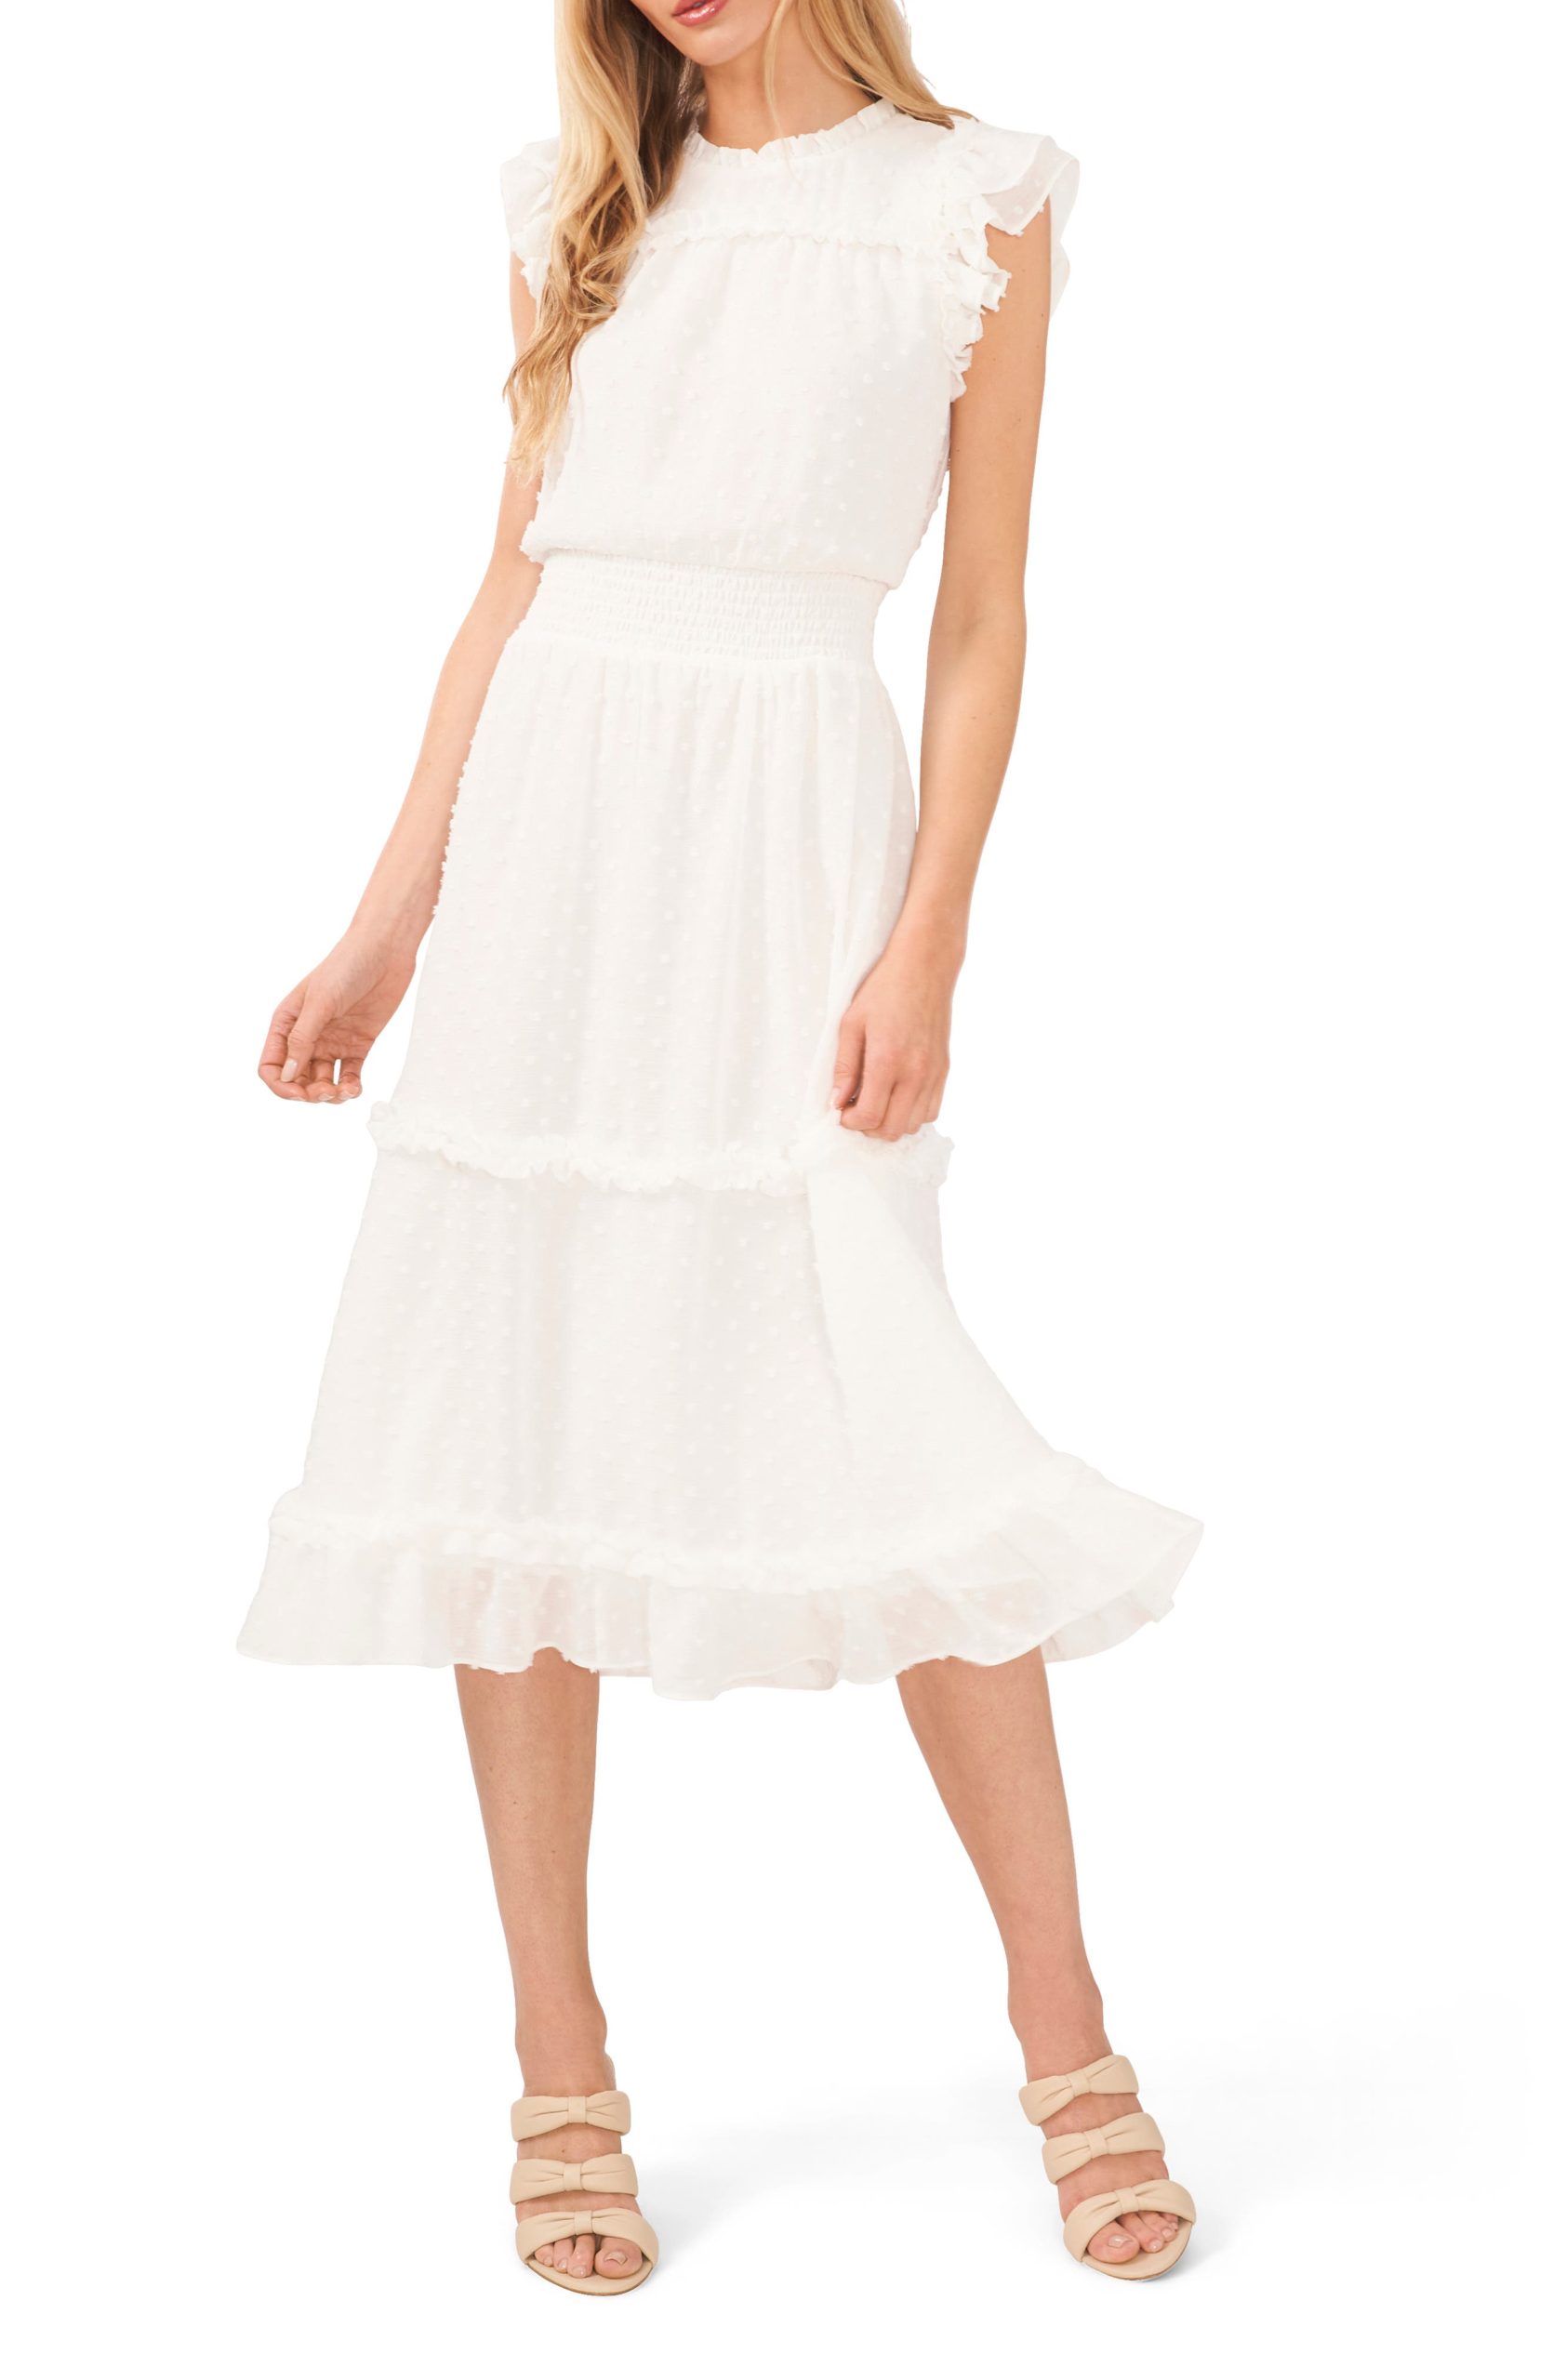 White dresses for women: Embracing the Timeless Allure of it插图4